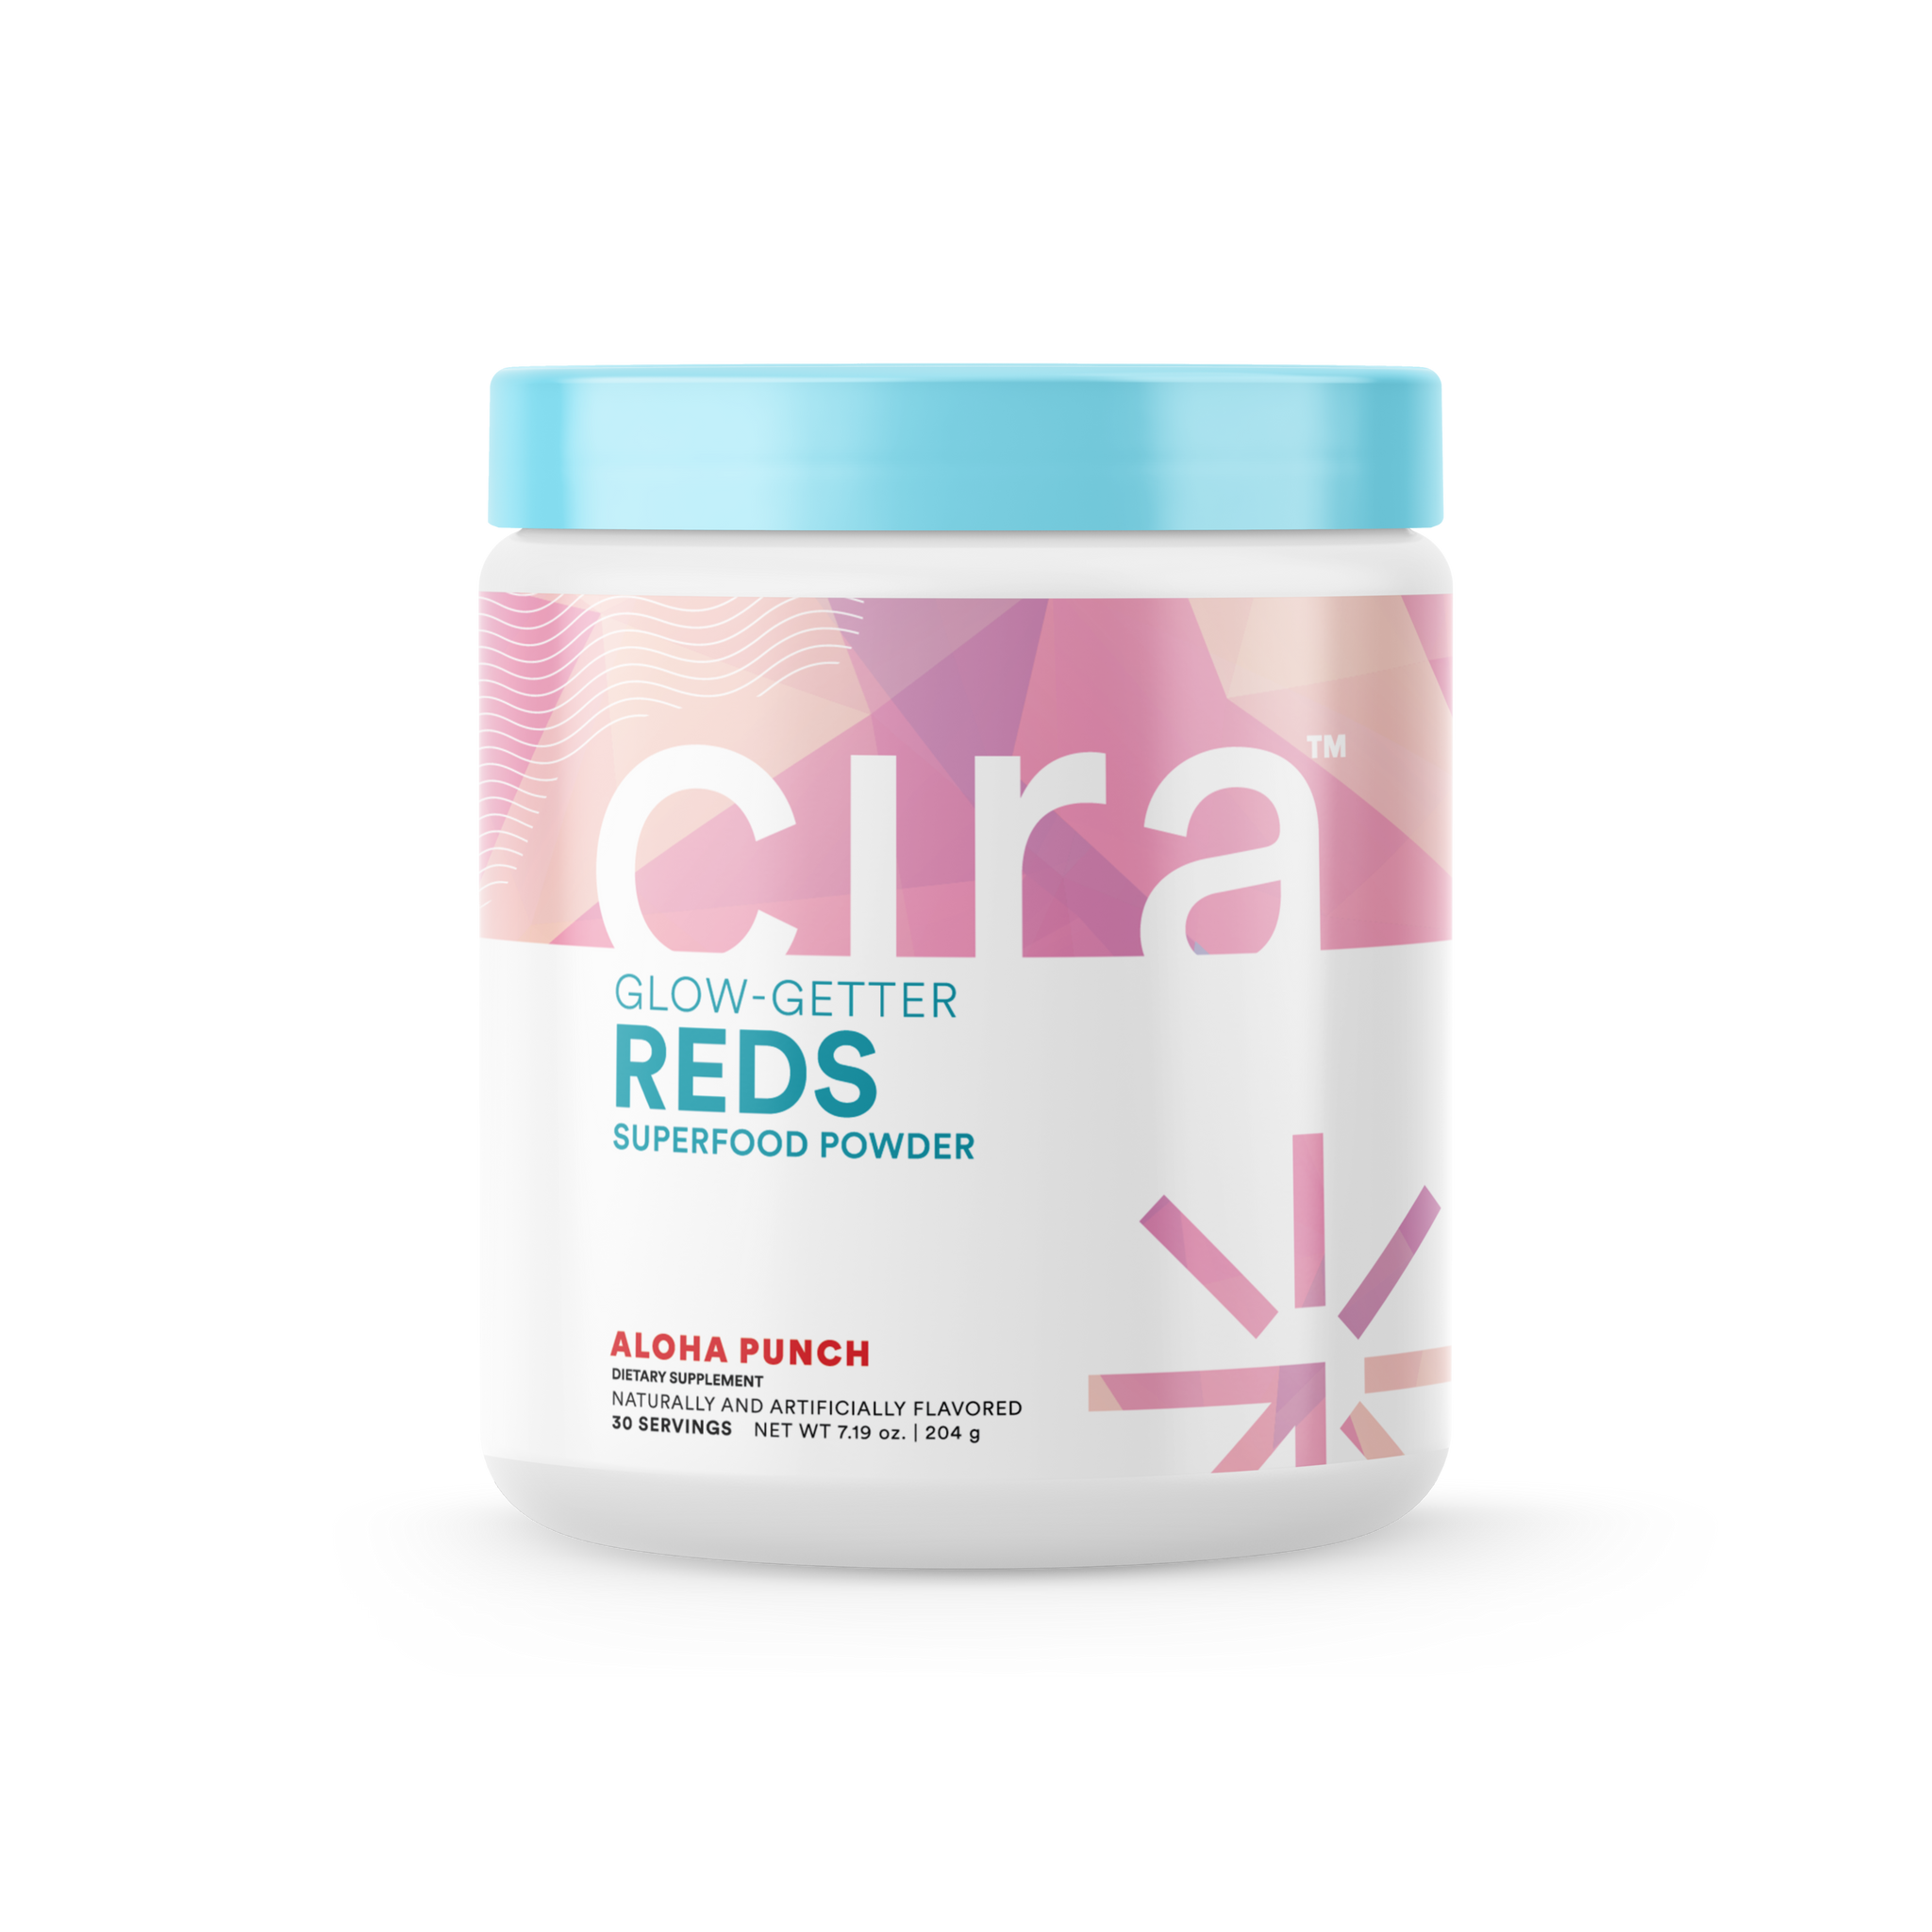 Cira Glow-Getter Reds Superfood Powder Aloha Punch in a white tub with a pink label and a blue lid